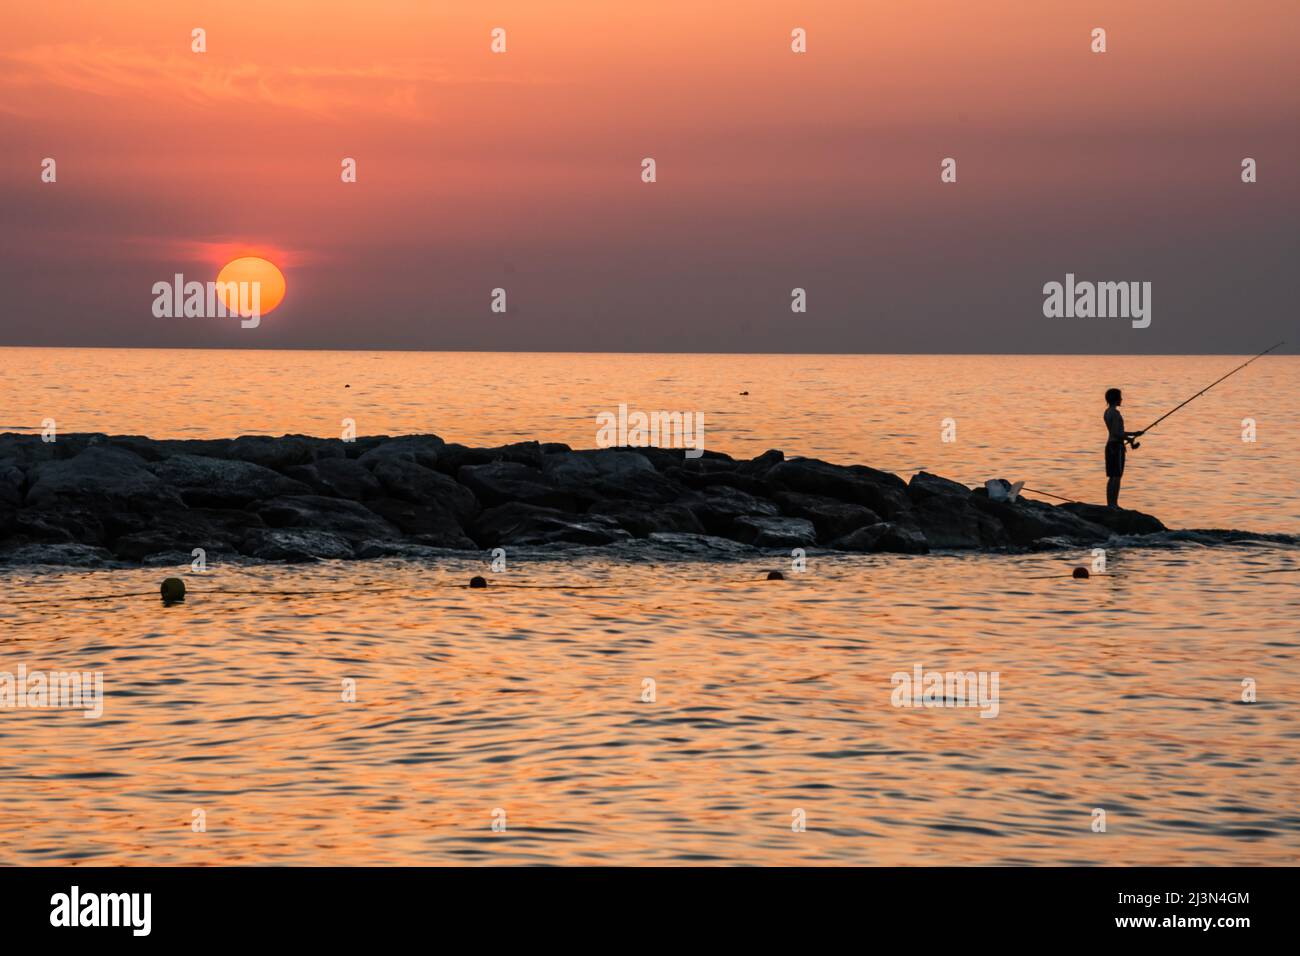 Man and mother nature, sunset scenery Stock Photo